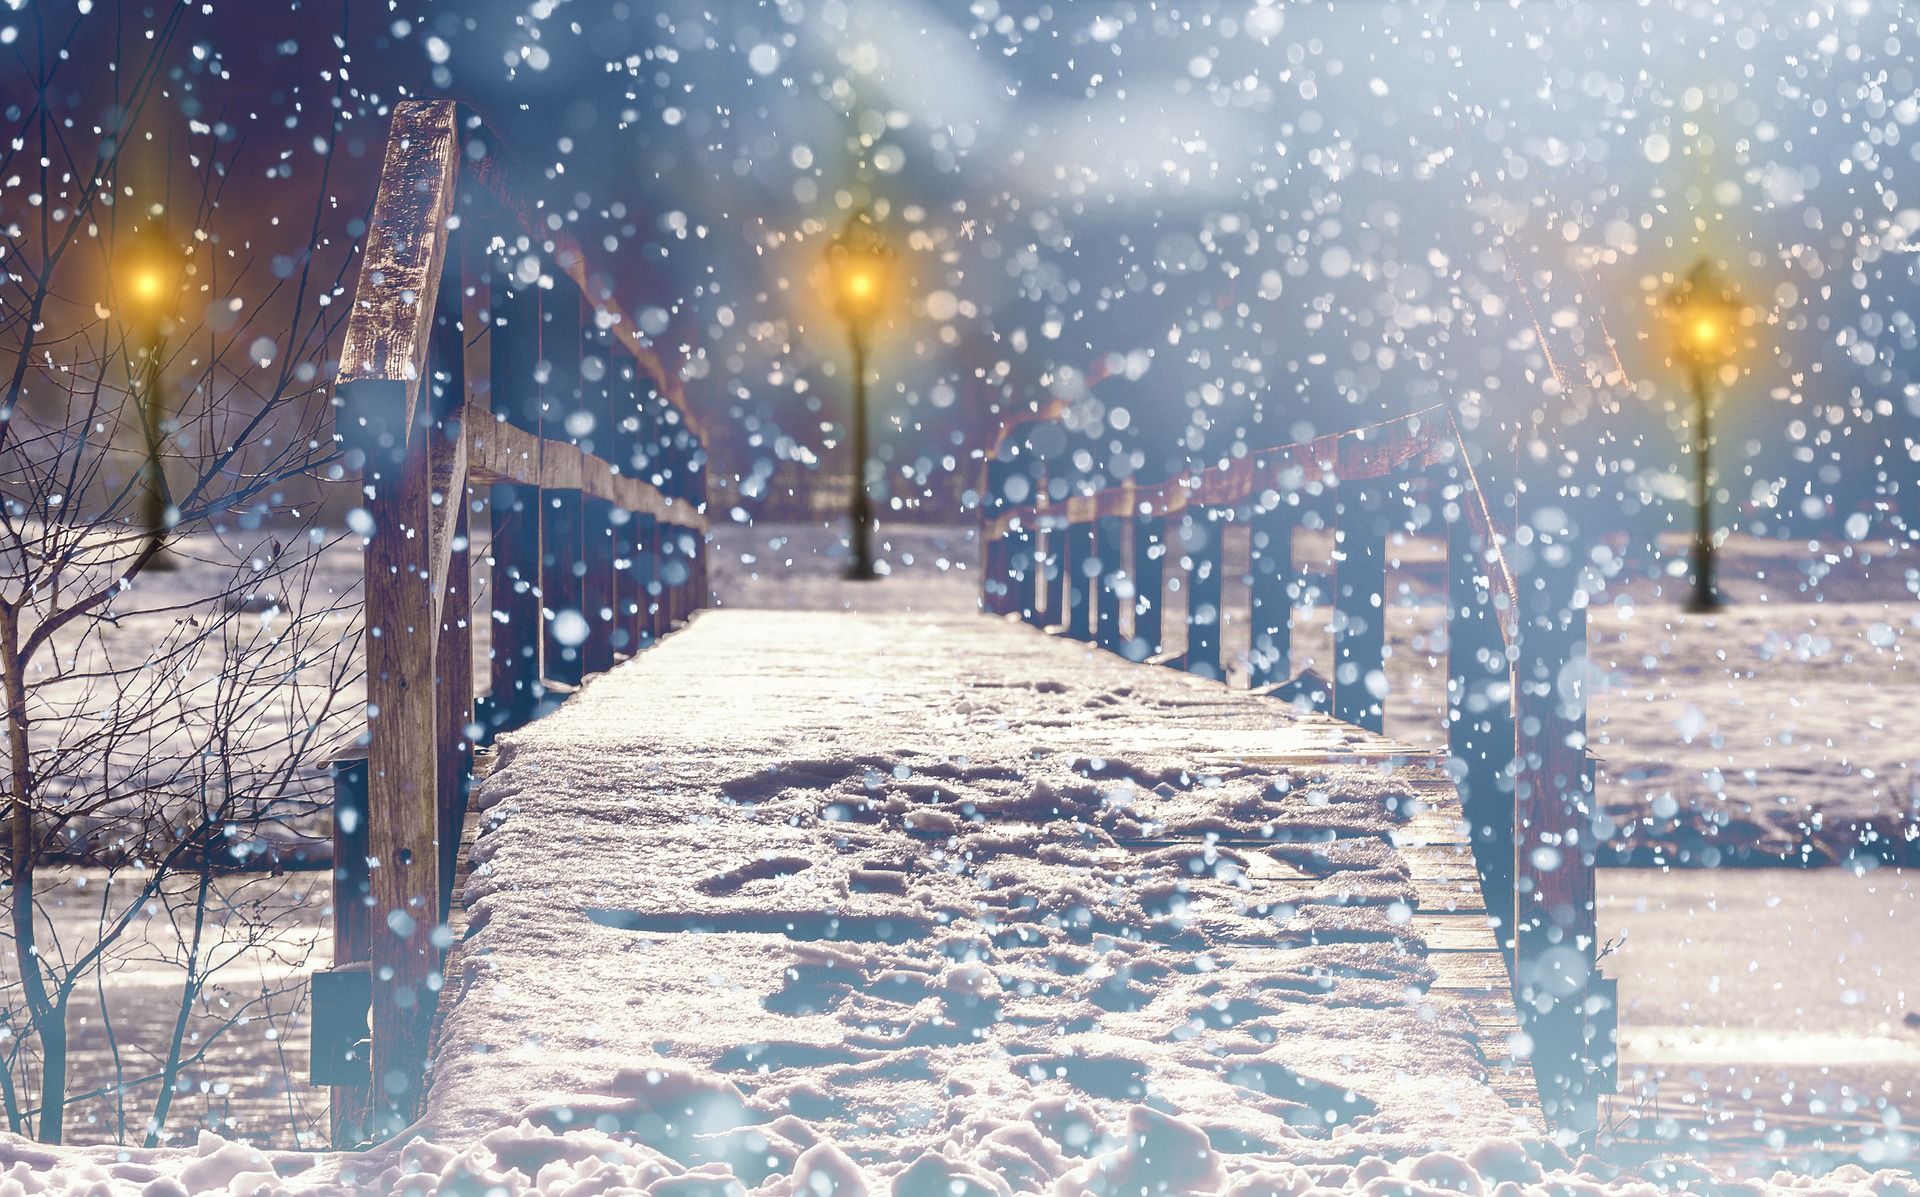 Night Time Christmast Snow Wallpaper 1920p Free Download - Winter In Smoky Mountains - HD Wallpaper 